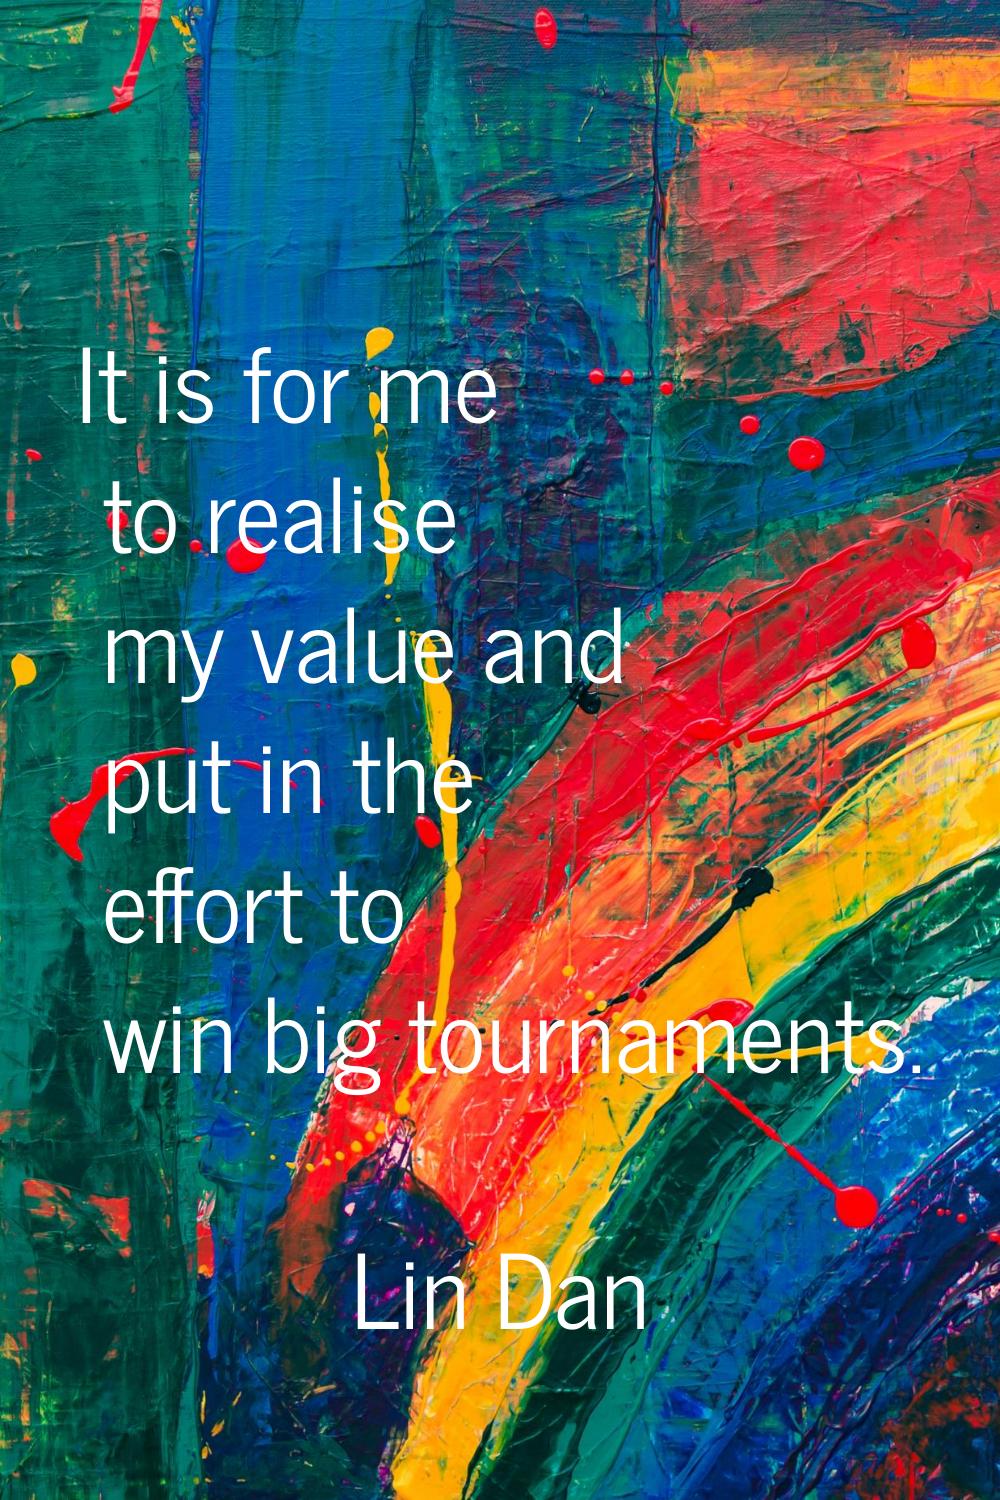 It is for me to realise my value and put in the effort to win big tournaments.